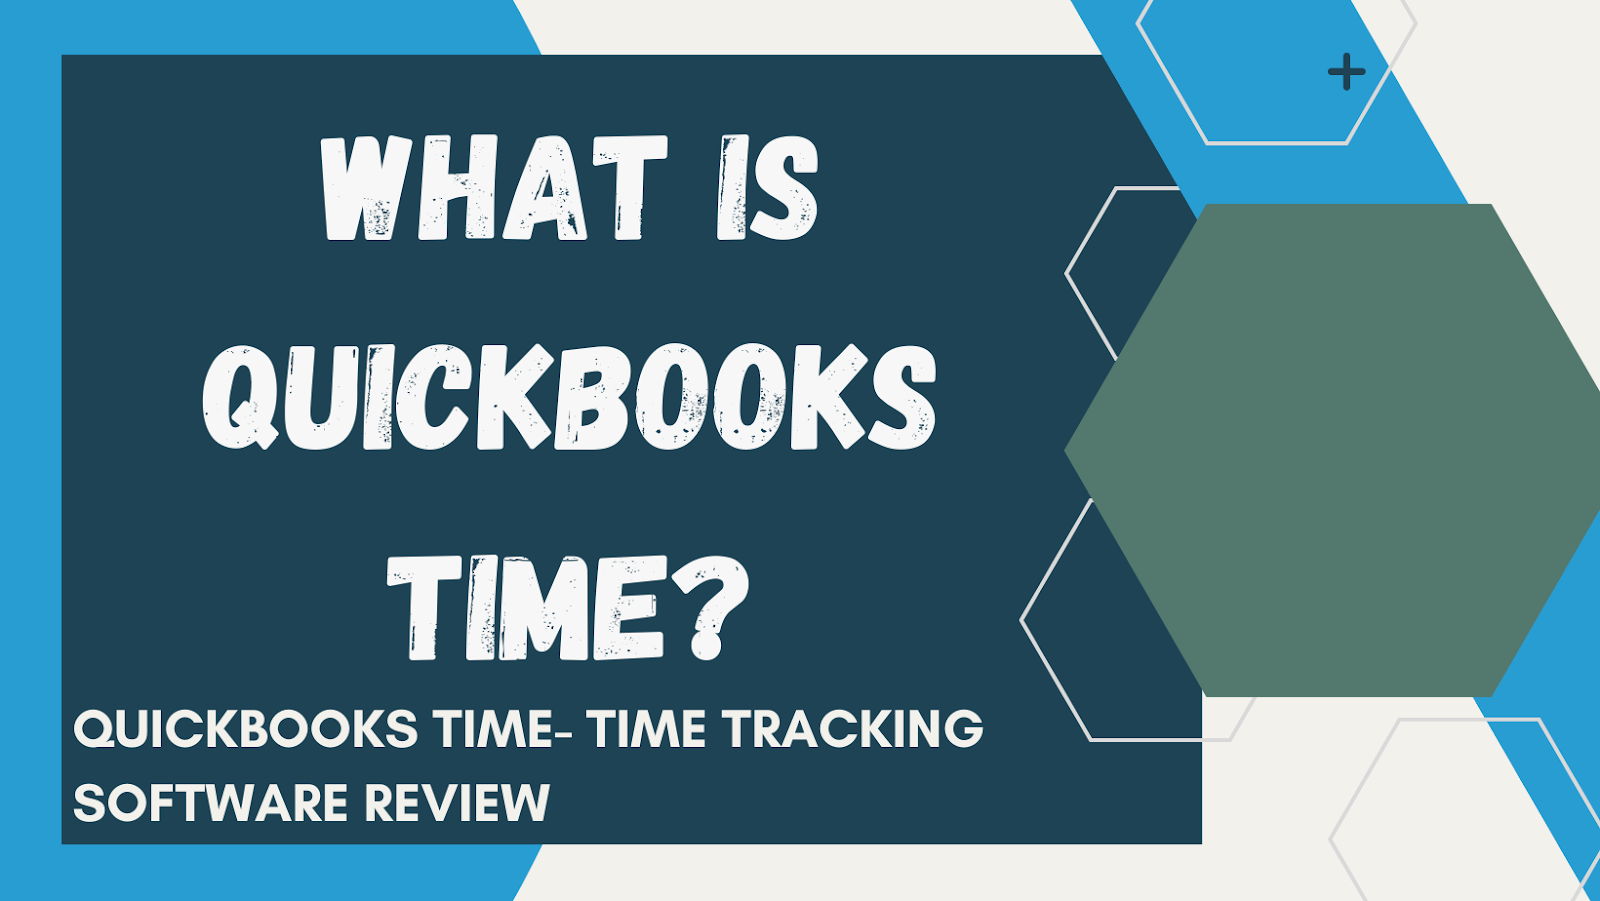 What Is QuickBooks Time?